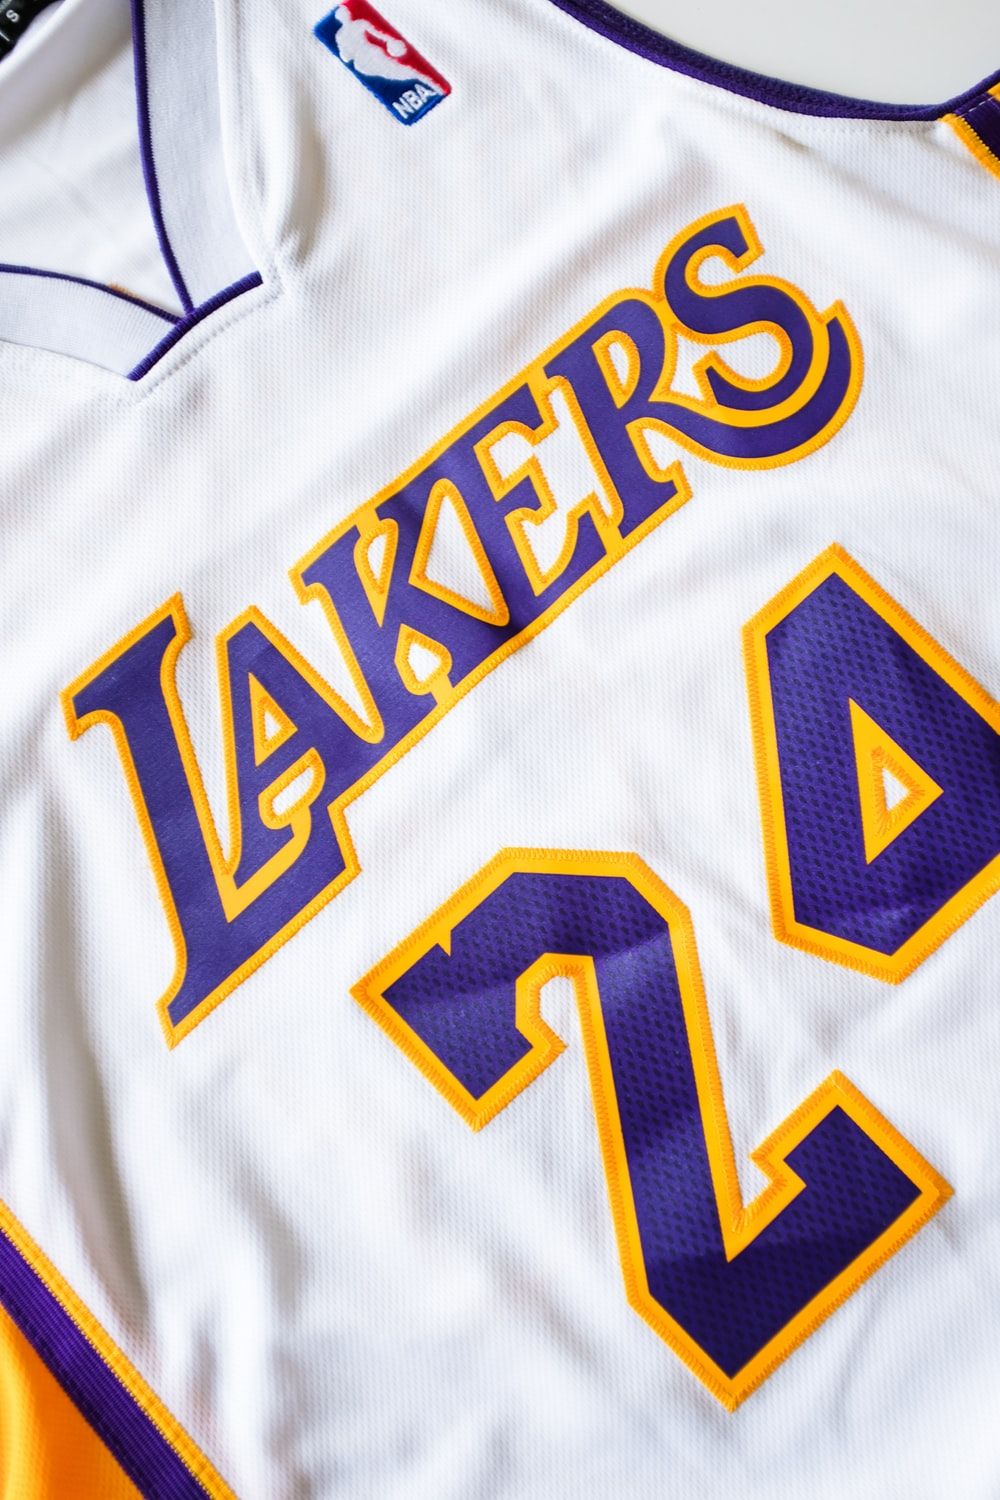 Lakers Jersey Picture. Download Free .com